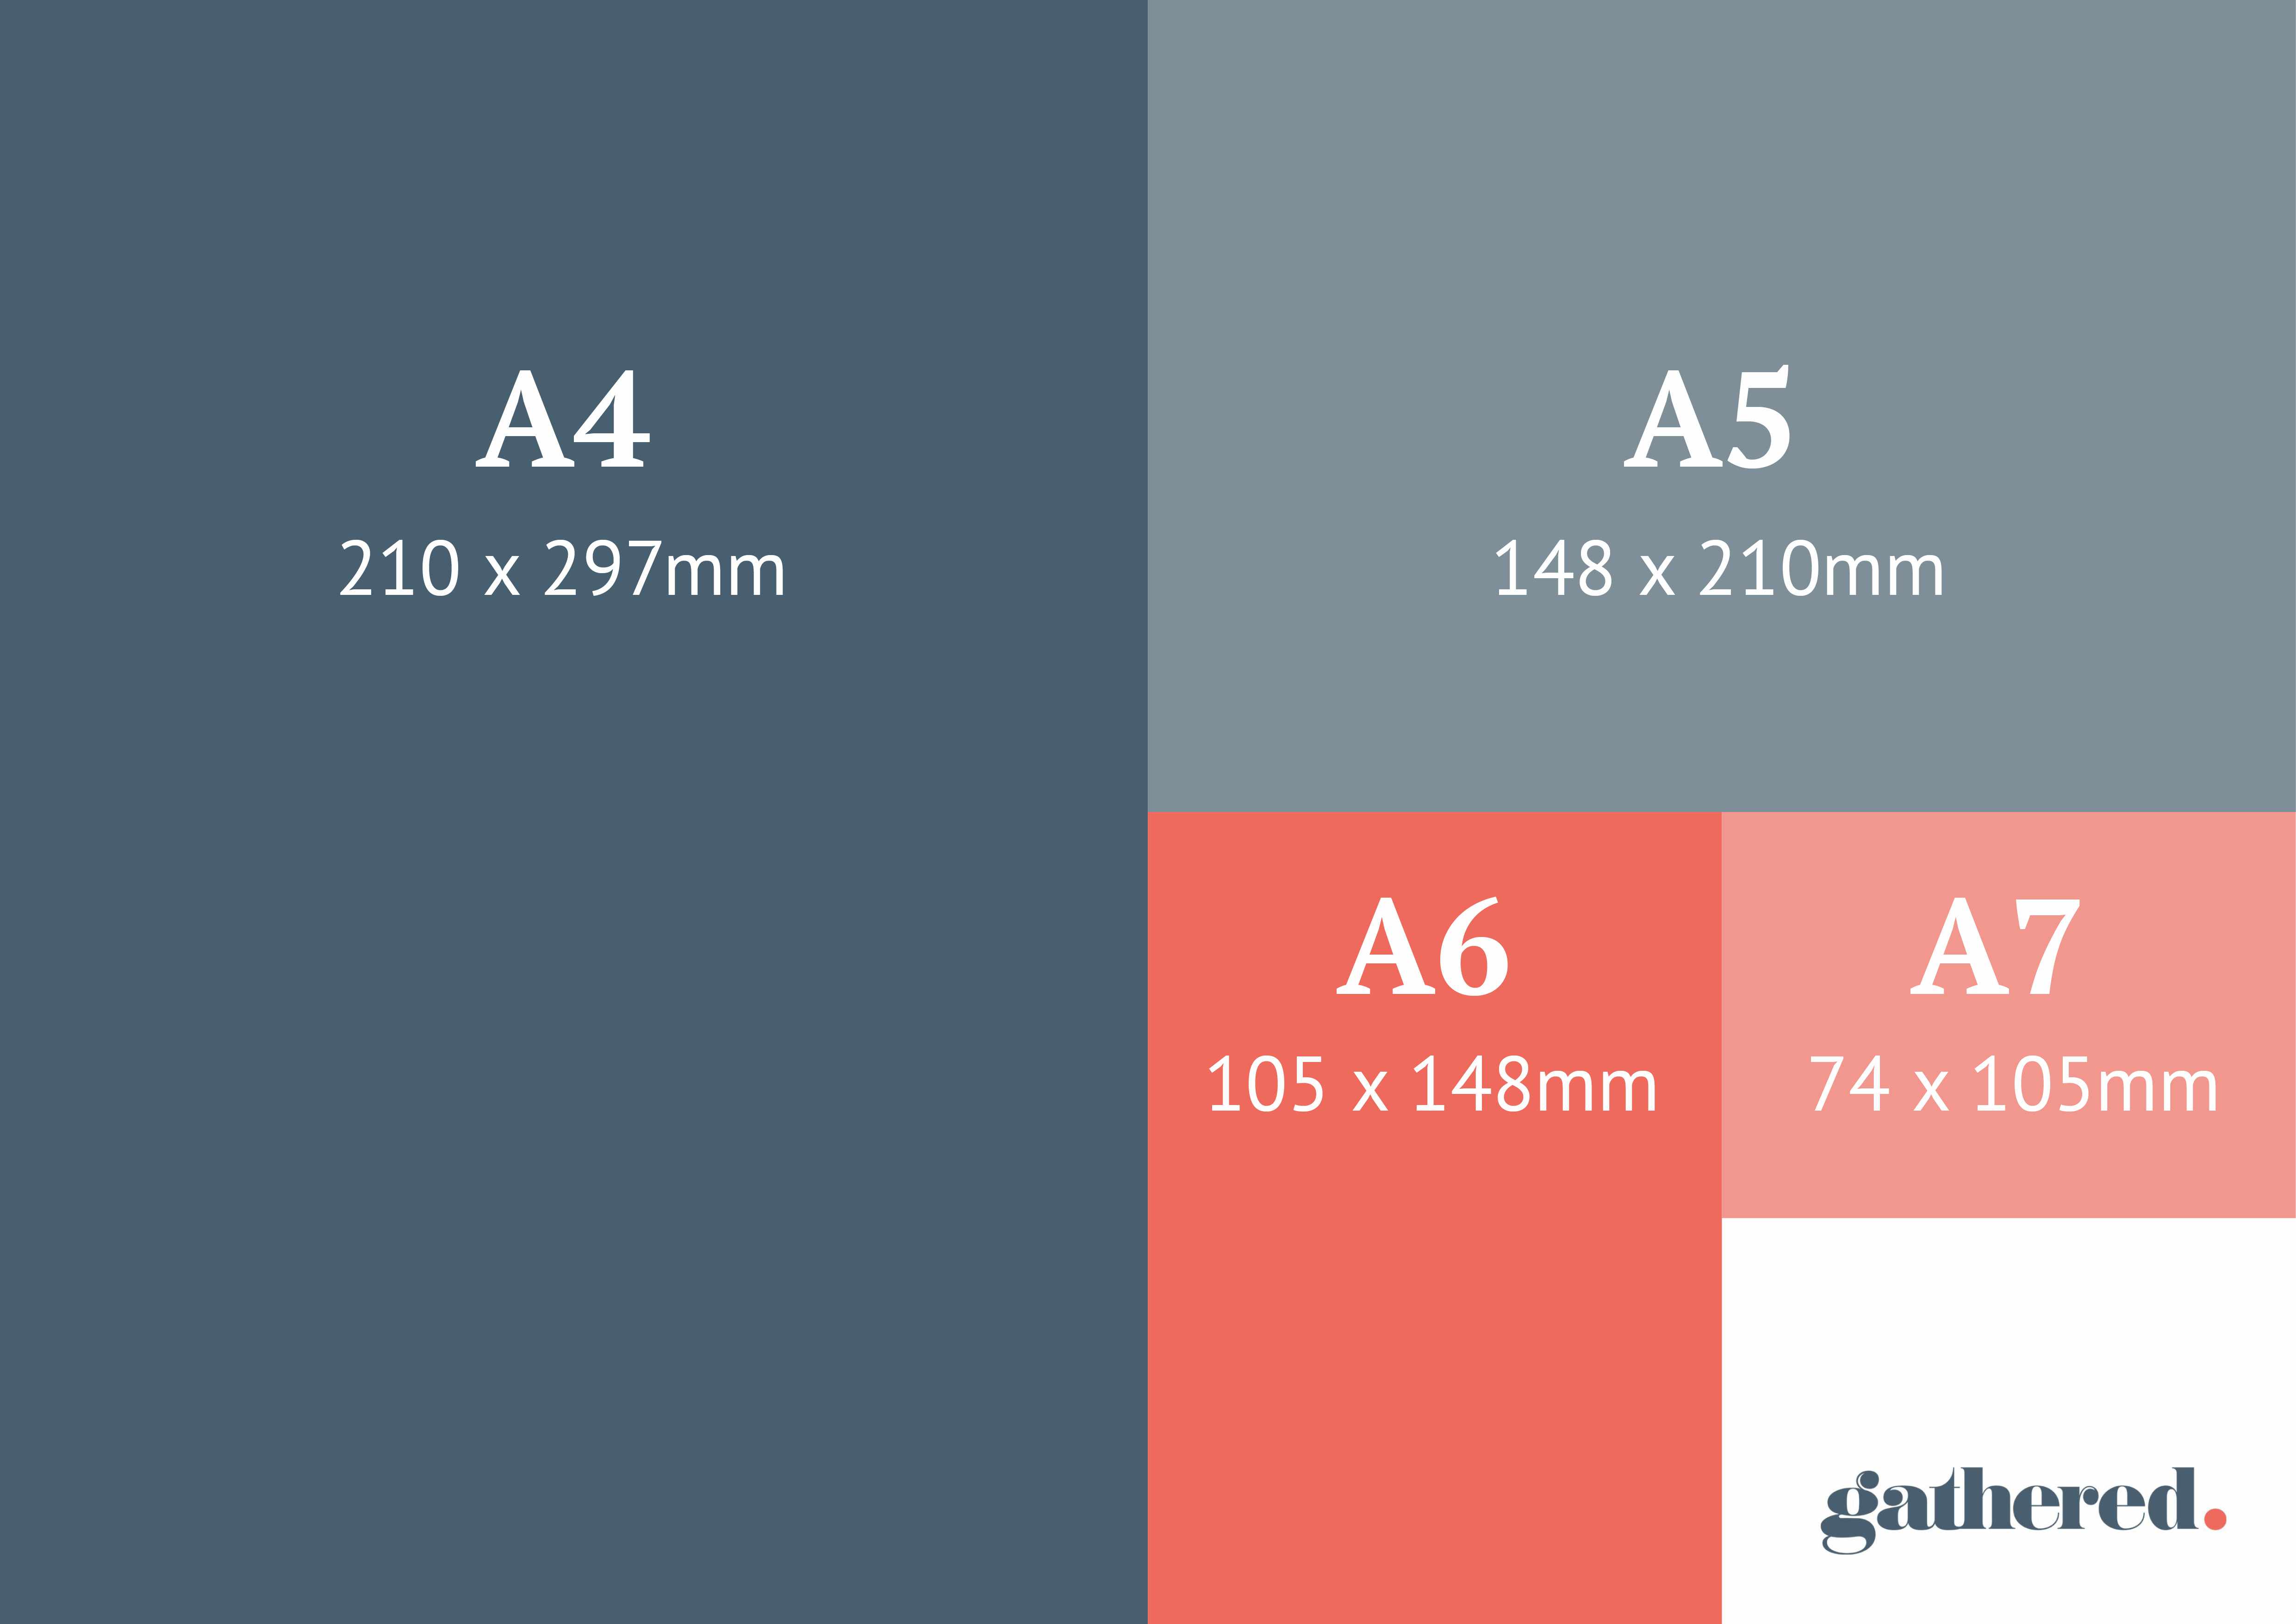 A4 Paper Size Dimensions in Centimeters